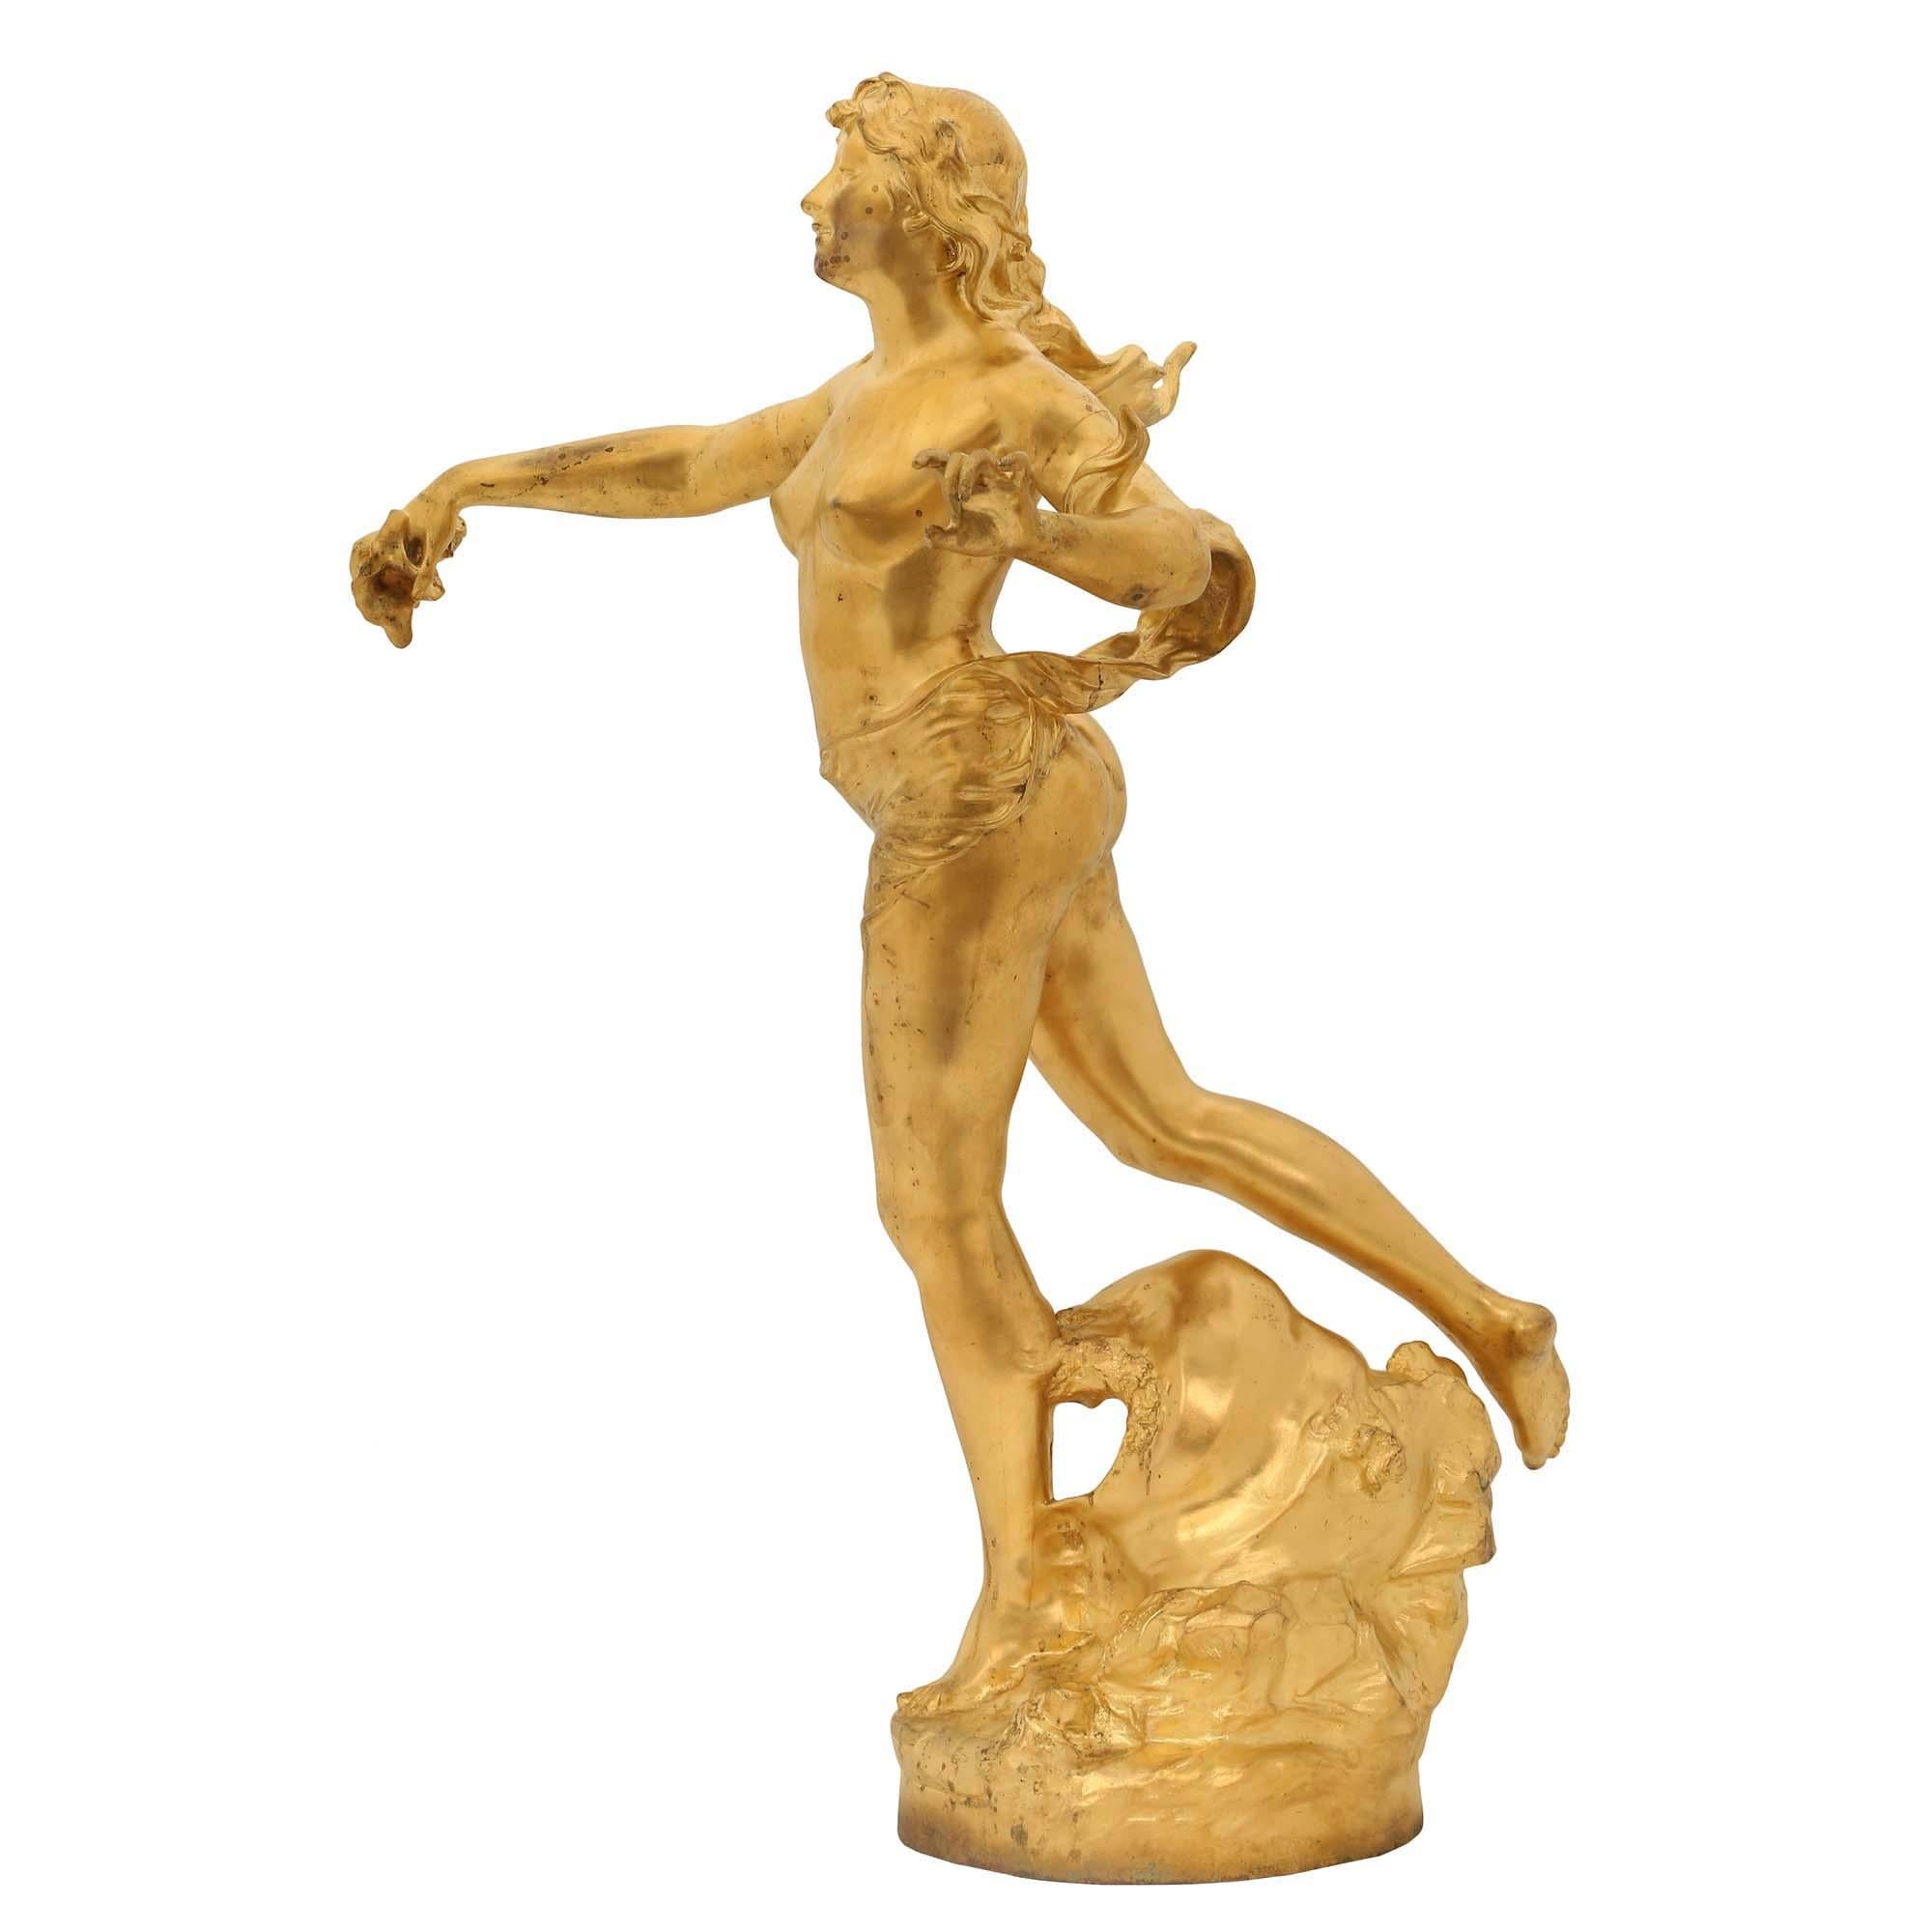  French 19th Century Ormolu Statue of Nereids, Signed Claude-André Férigoule In Good Condition For Sale In West Palm Beach, FL